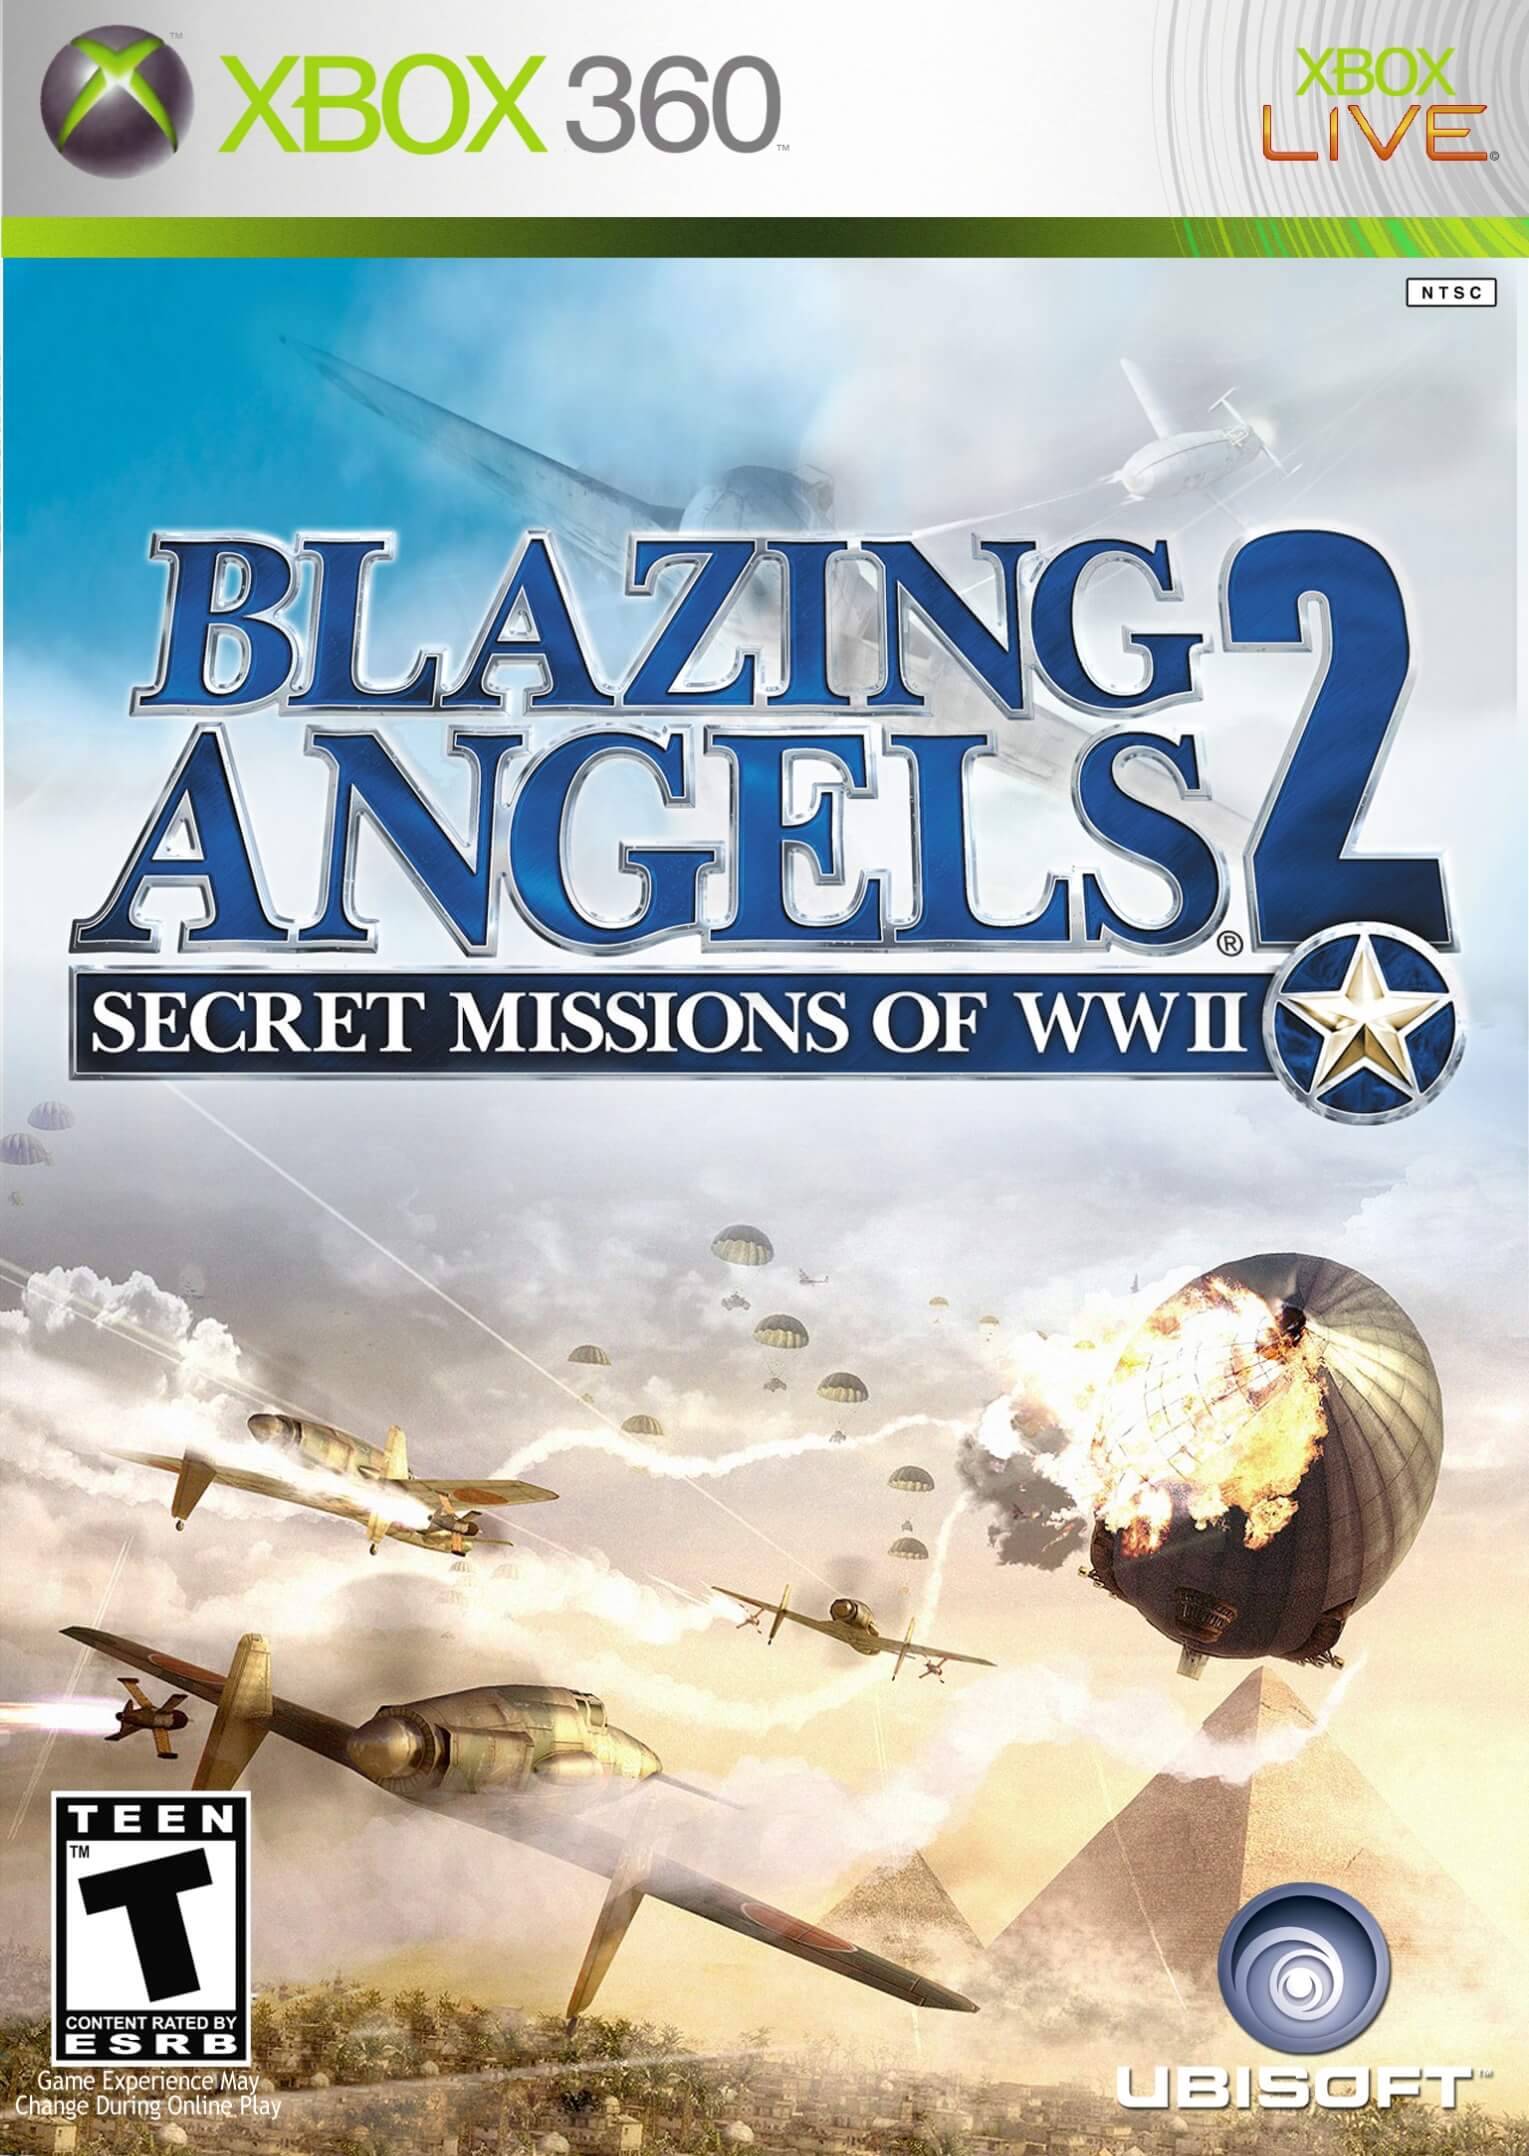 Blazing Angels 2: Secret Missions of WWII ROM & ISO - XBOX 360 Game